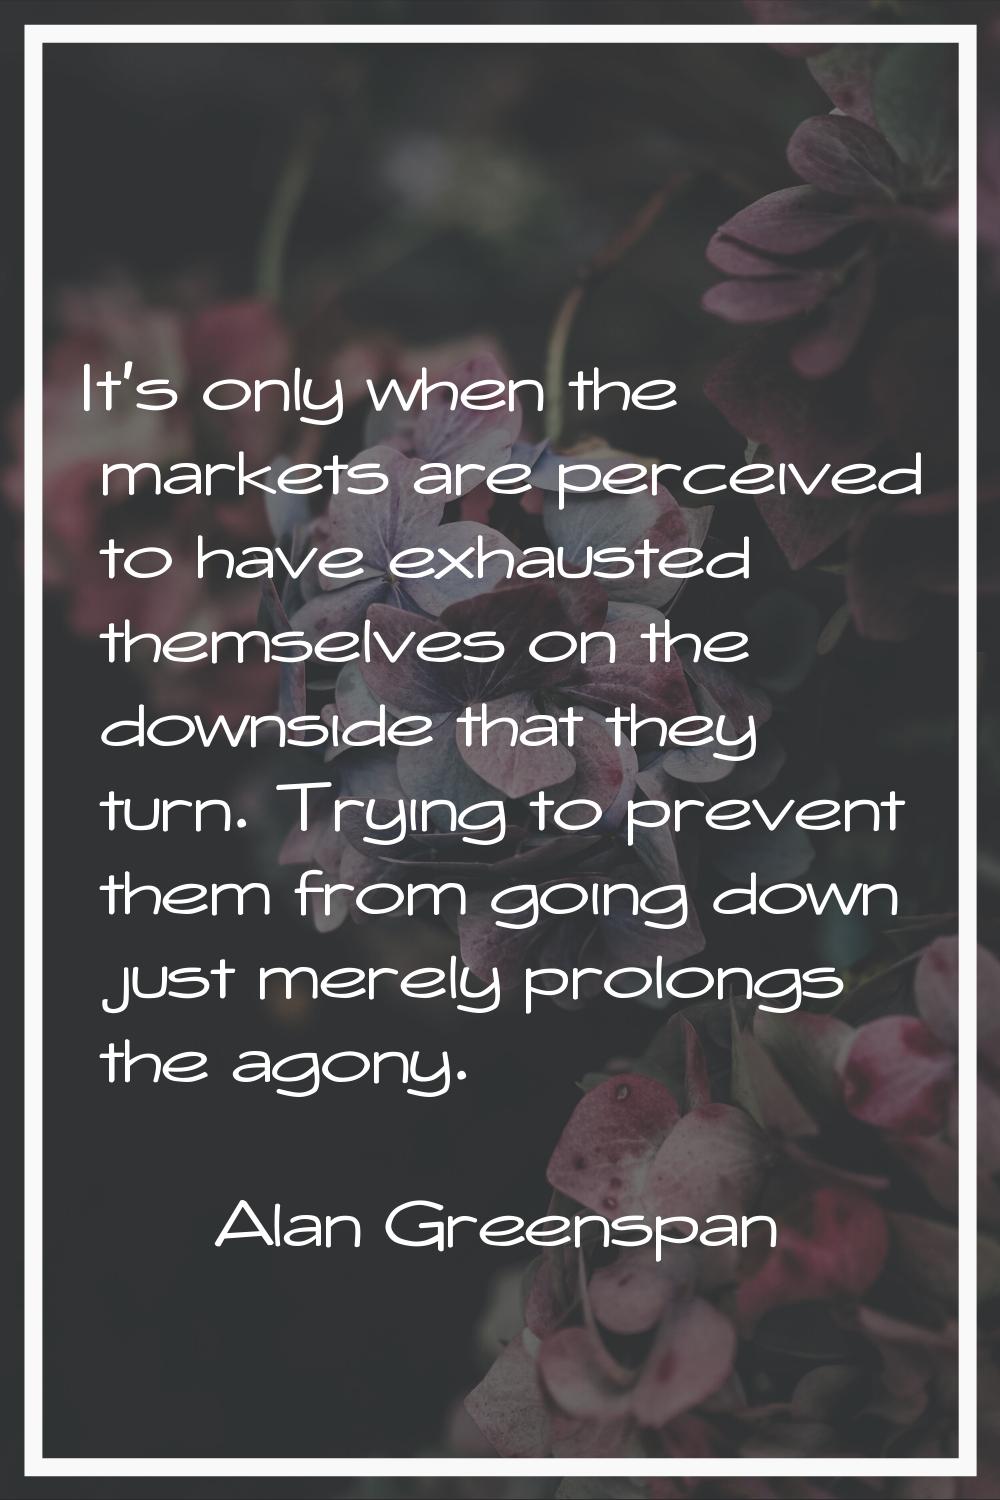 It's only when the markets are perceived to have exhausted themselves on the downside that they tur